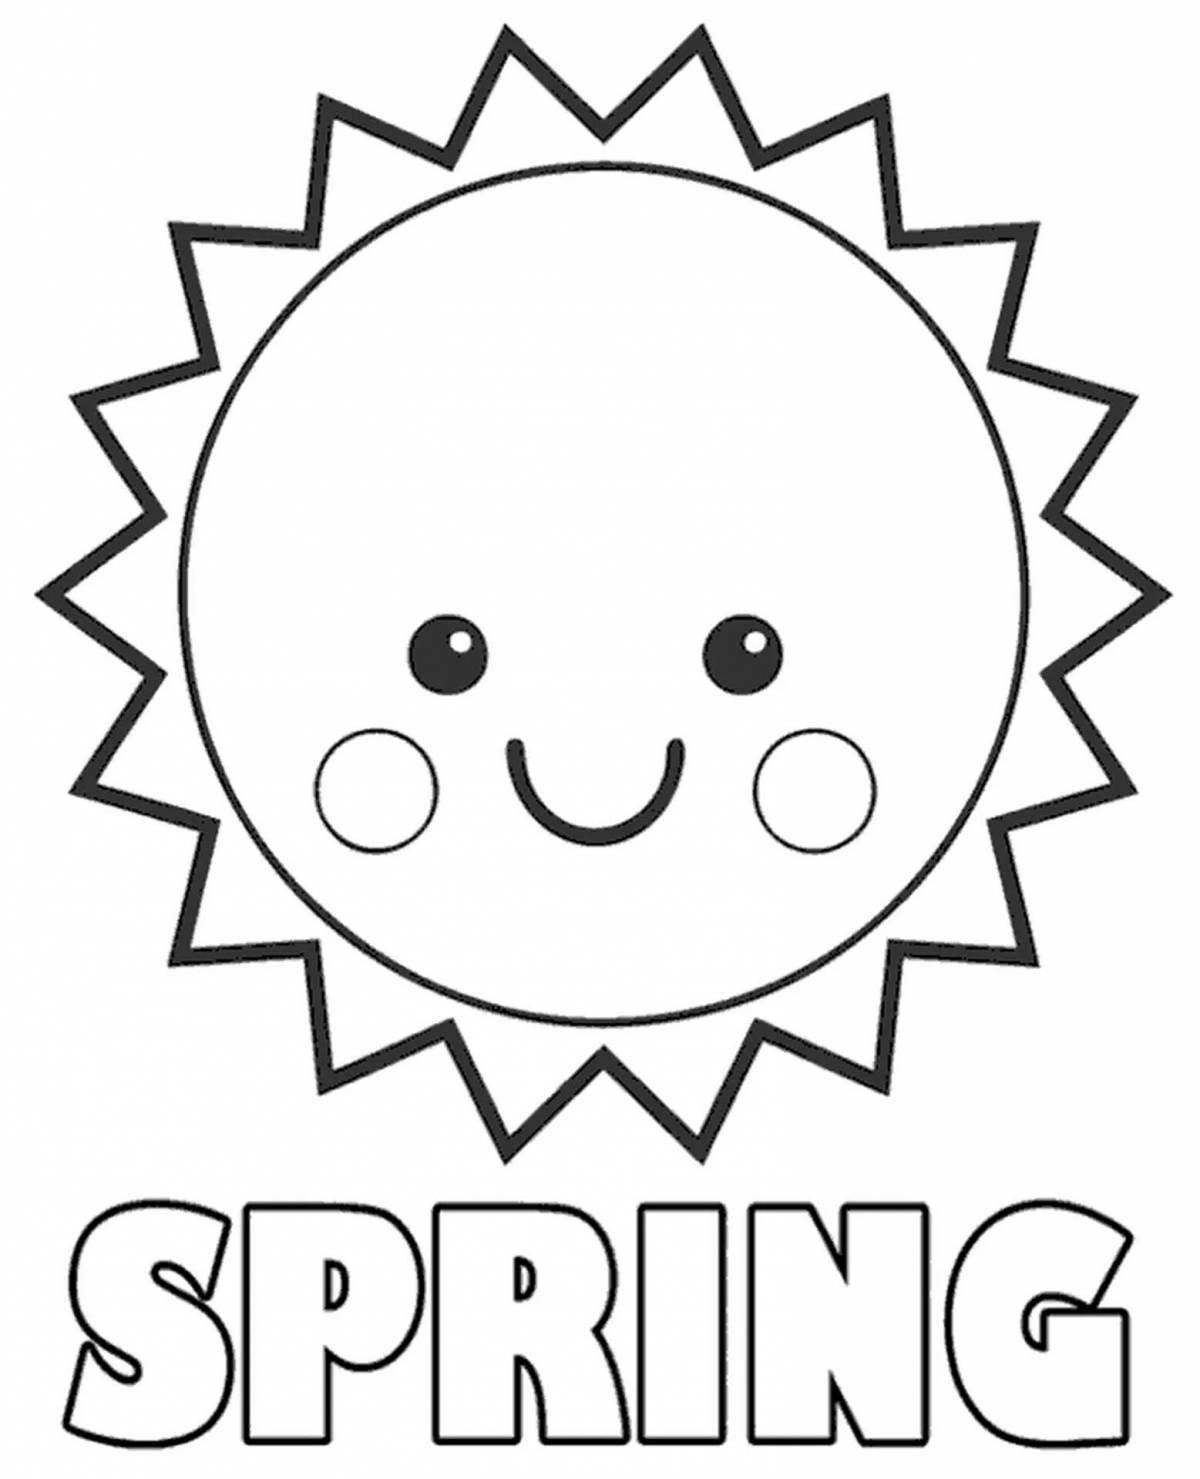 Adorable sunny pattern coloring page